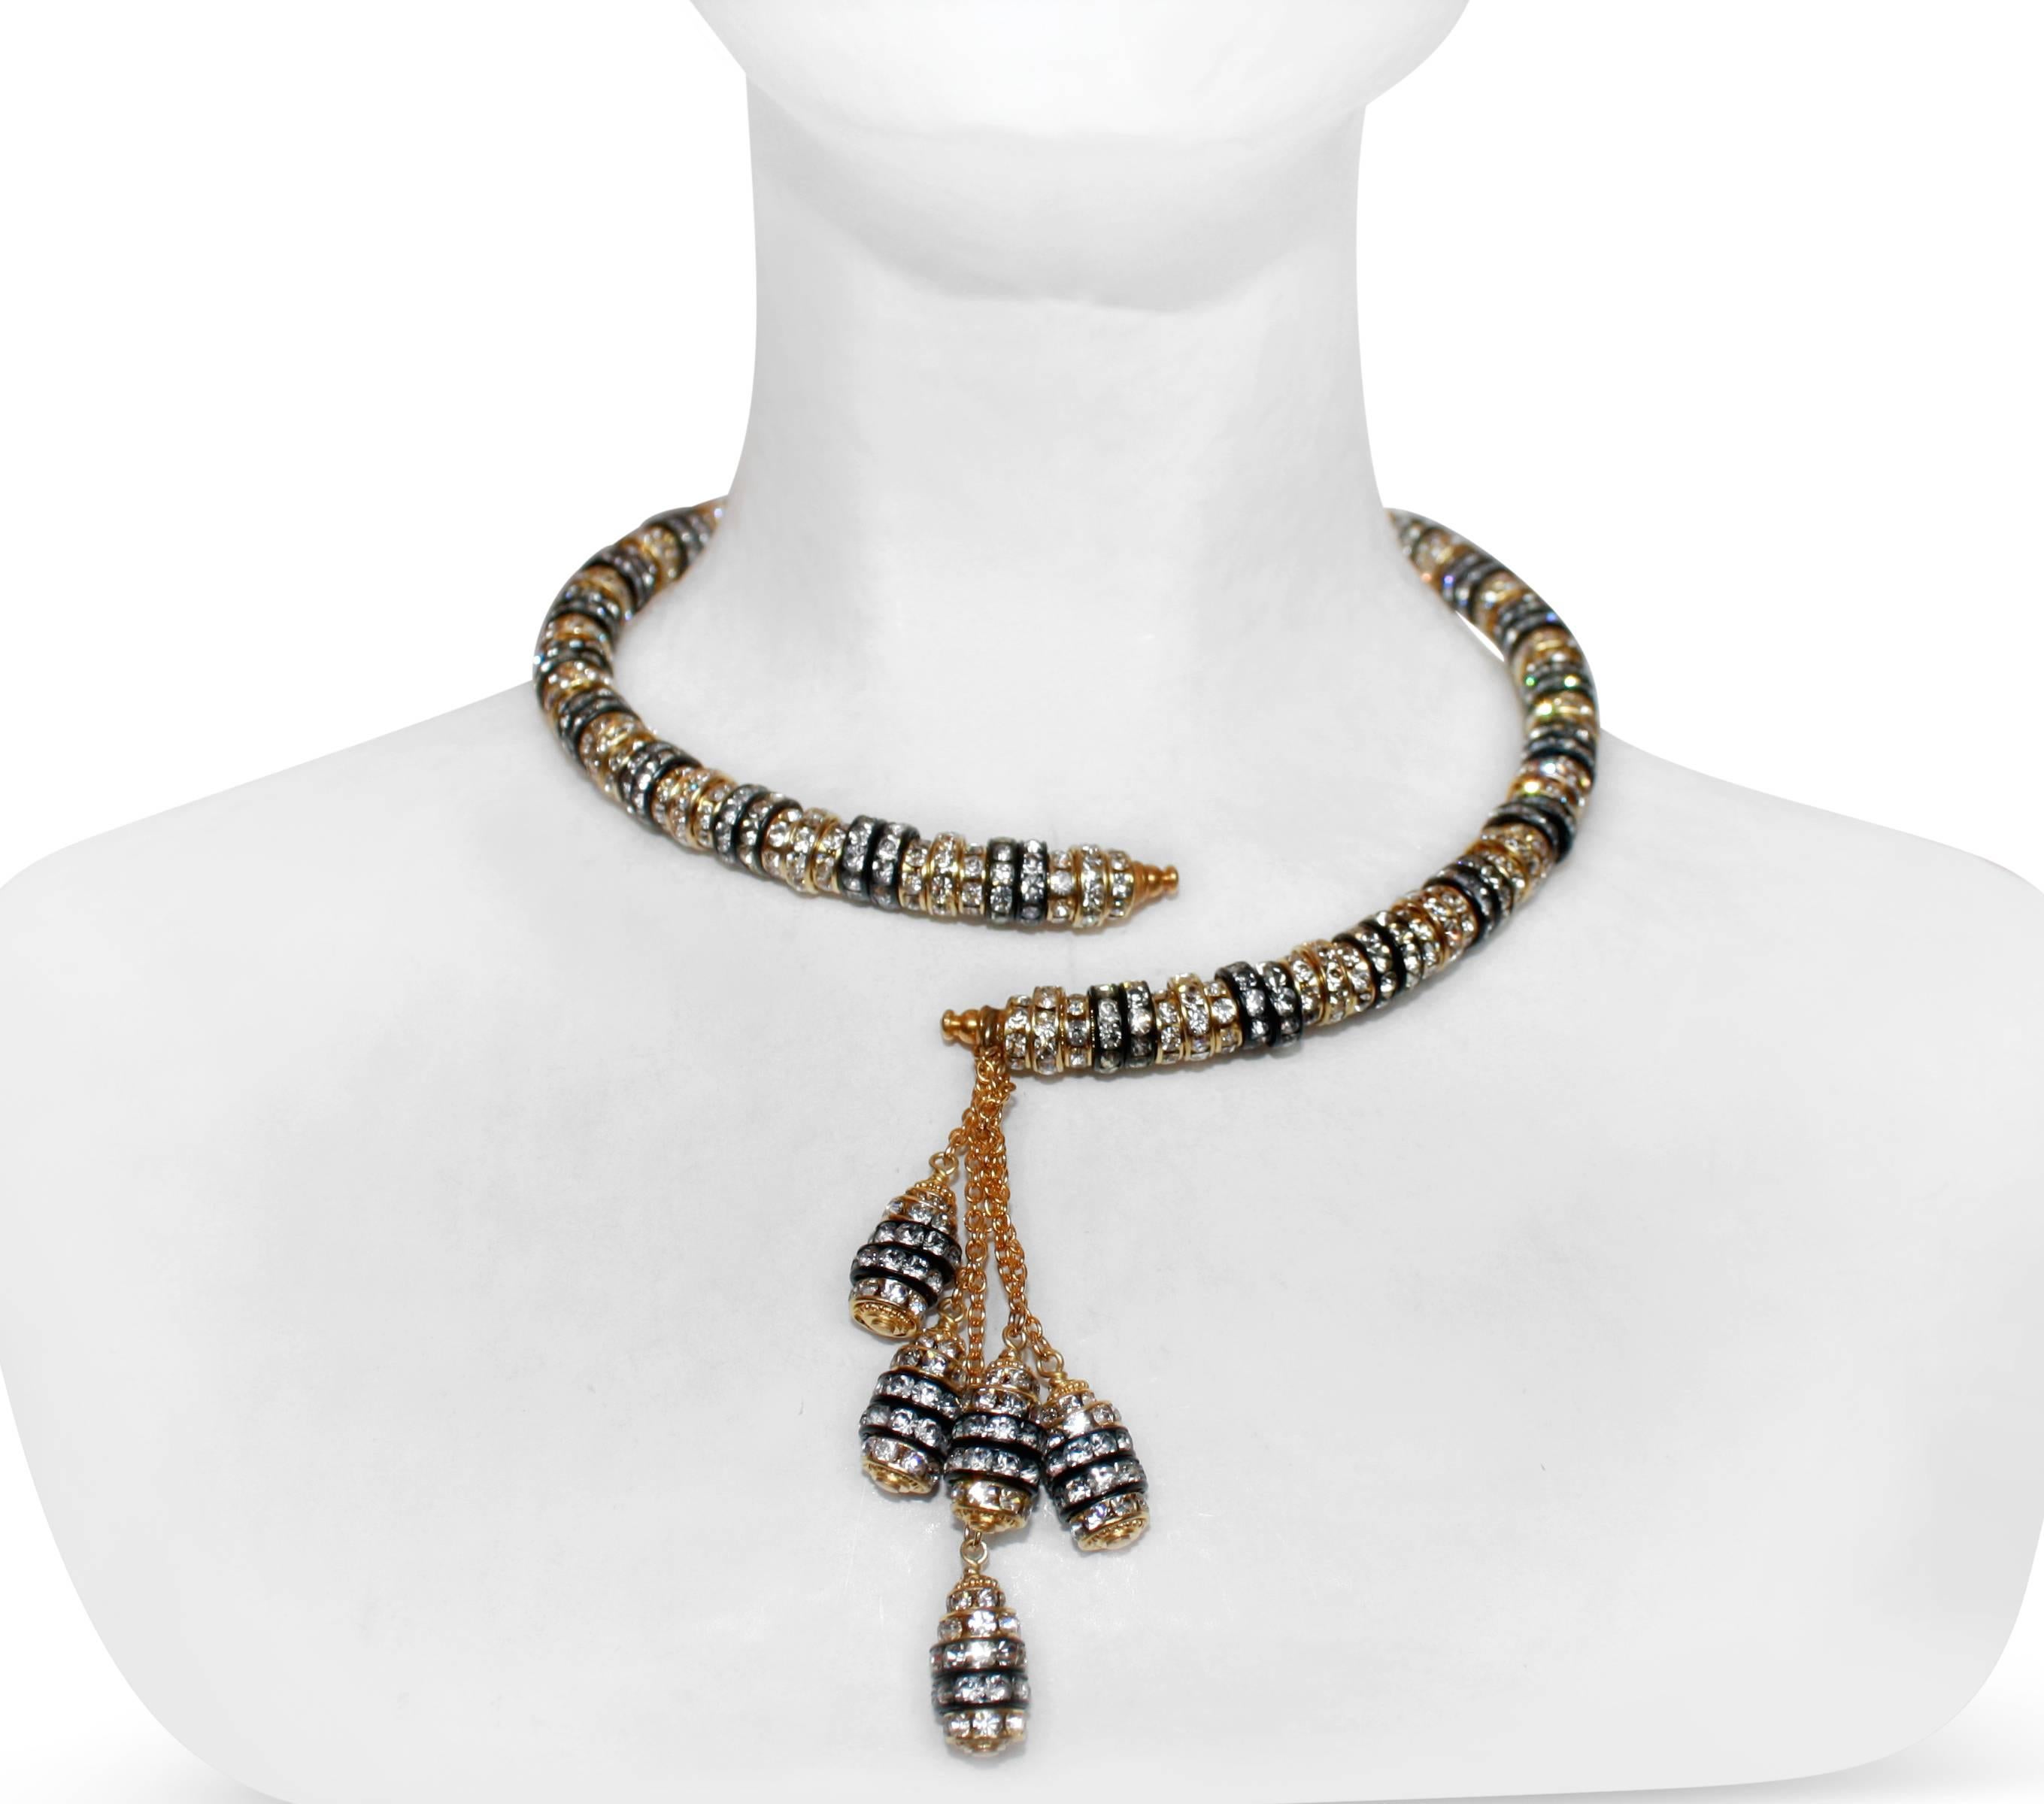 Swarovski Crystal rondelles set in a mix of yellow gold and rhodium are strung on molded wire, creating an easy to wear and elegant necklace from Francoise Montague.